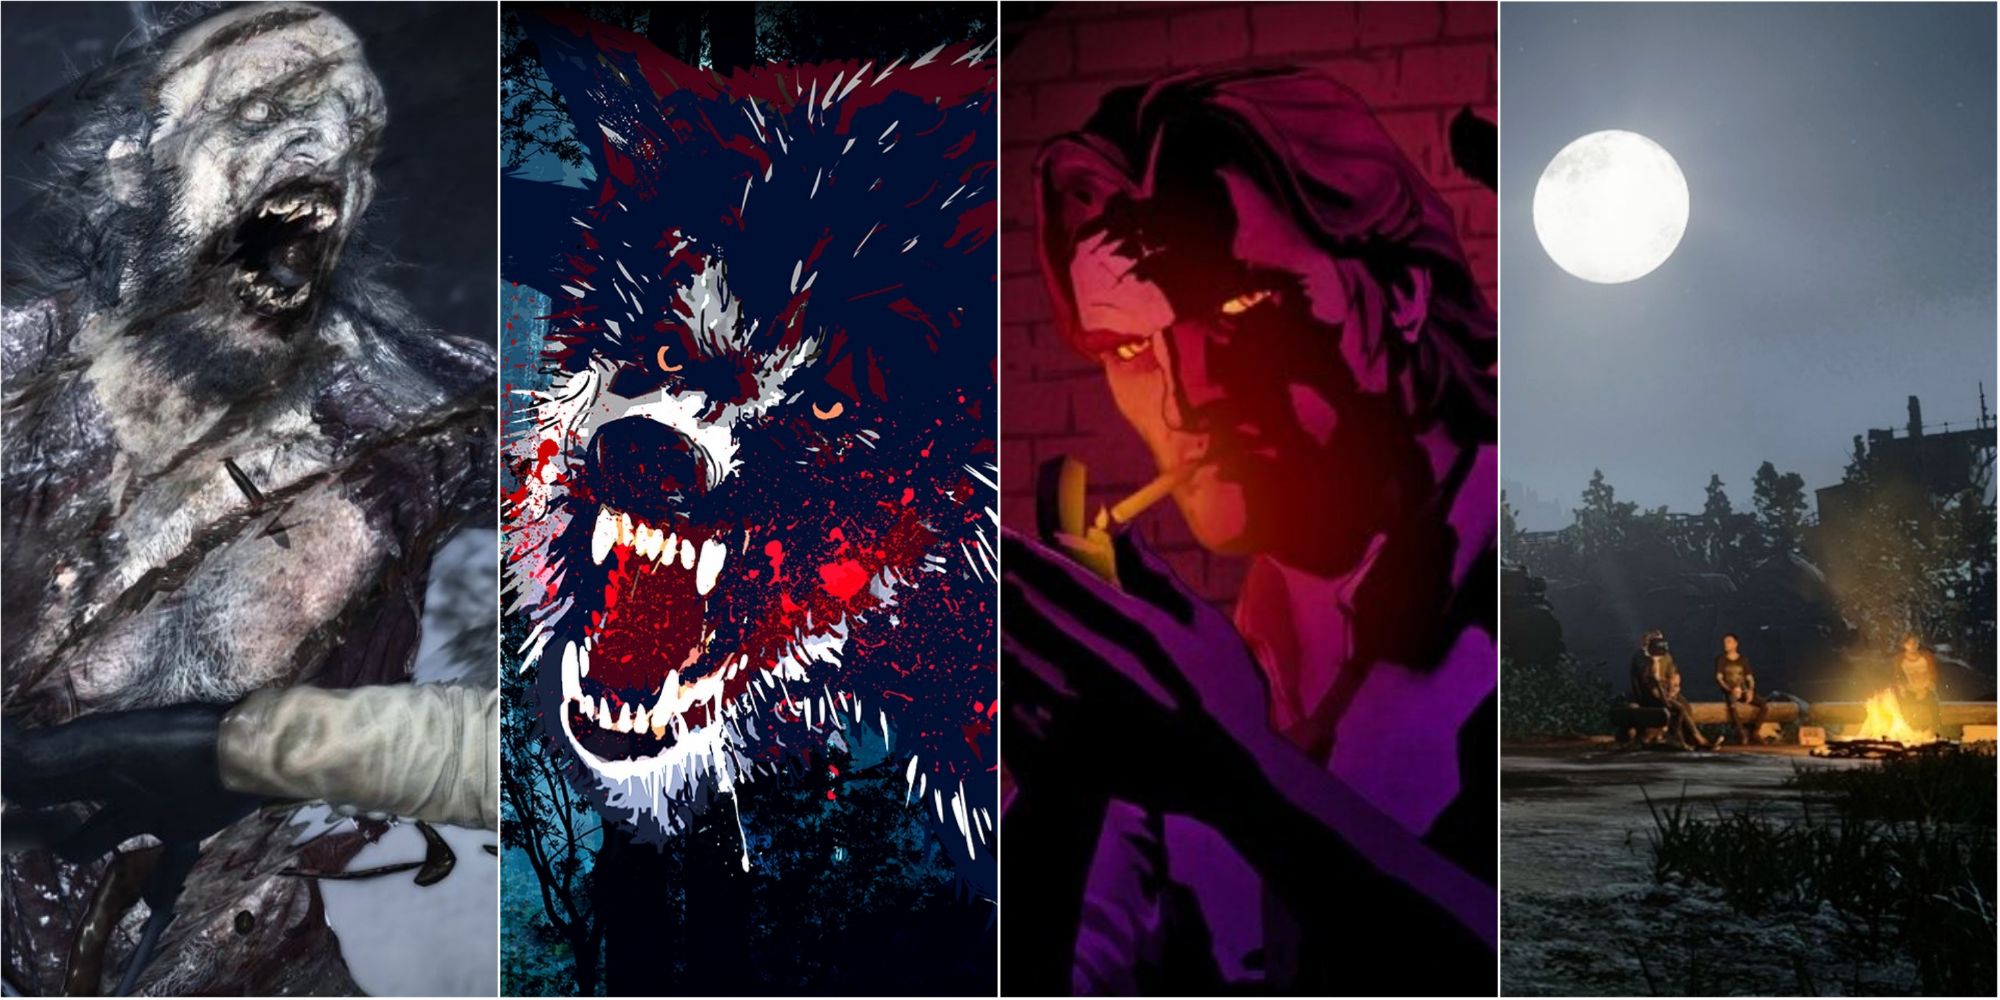 Werewolf Horror Games: Resident Evil 8, Werewolf The Apocalypse, The Wolf Among Us, The Quarry